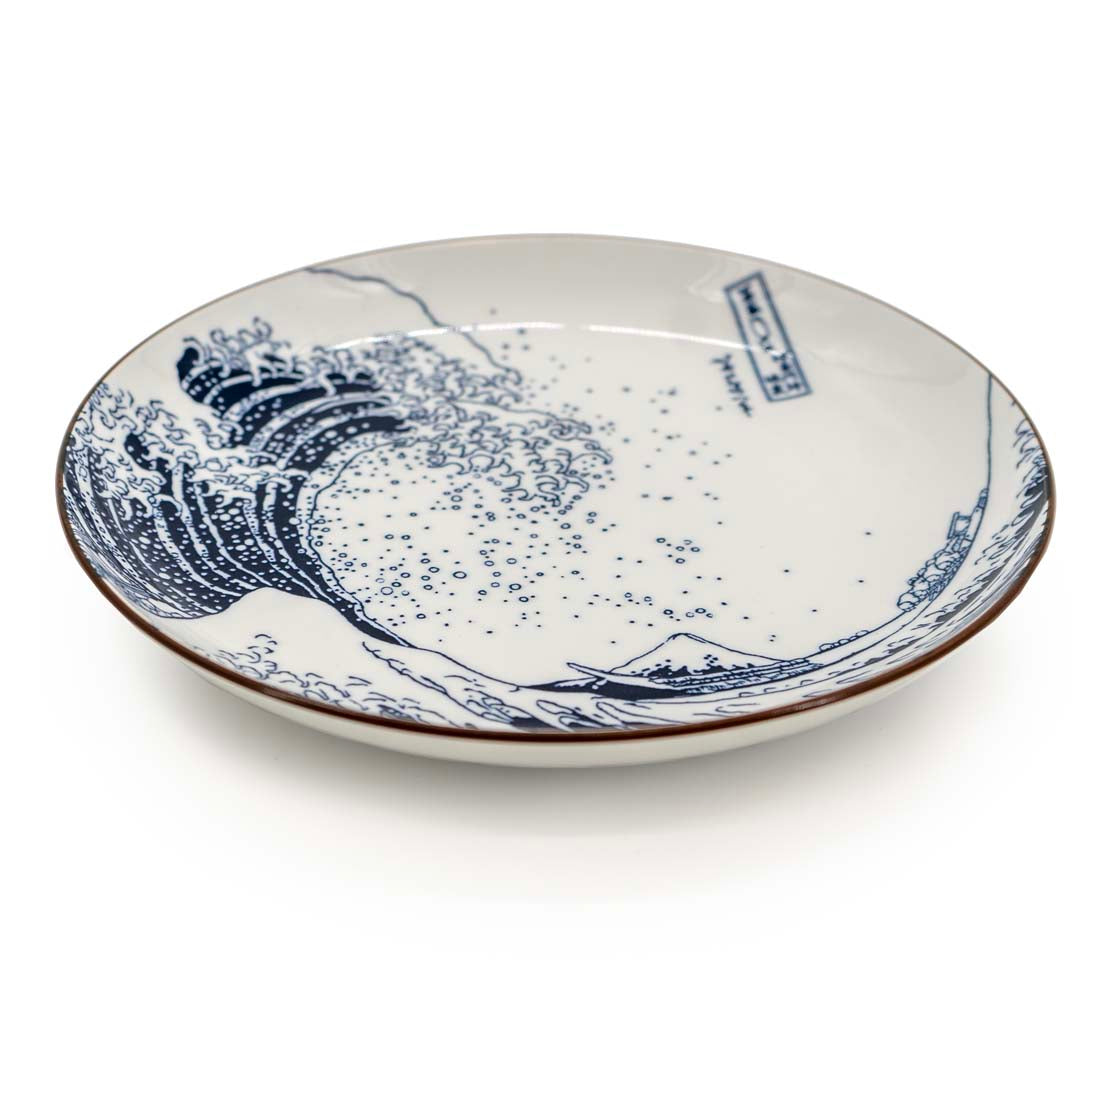 The Great Wave Ceramic Dinner Plate